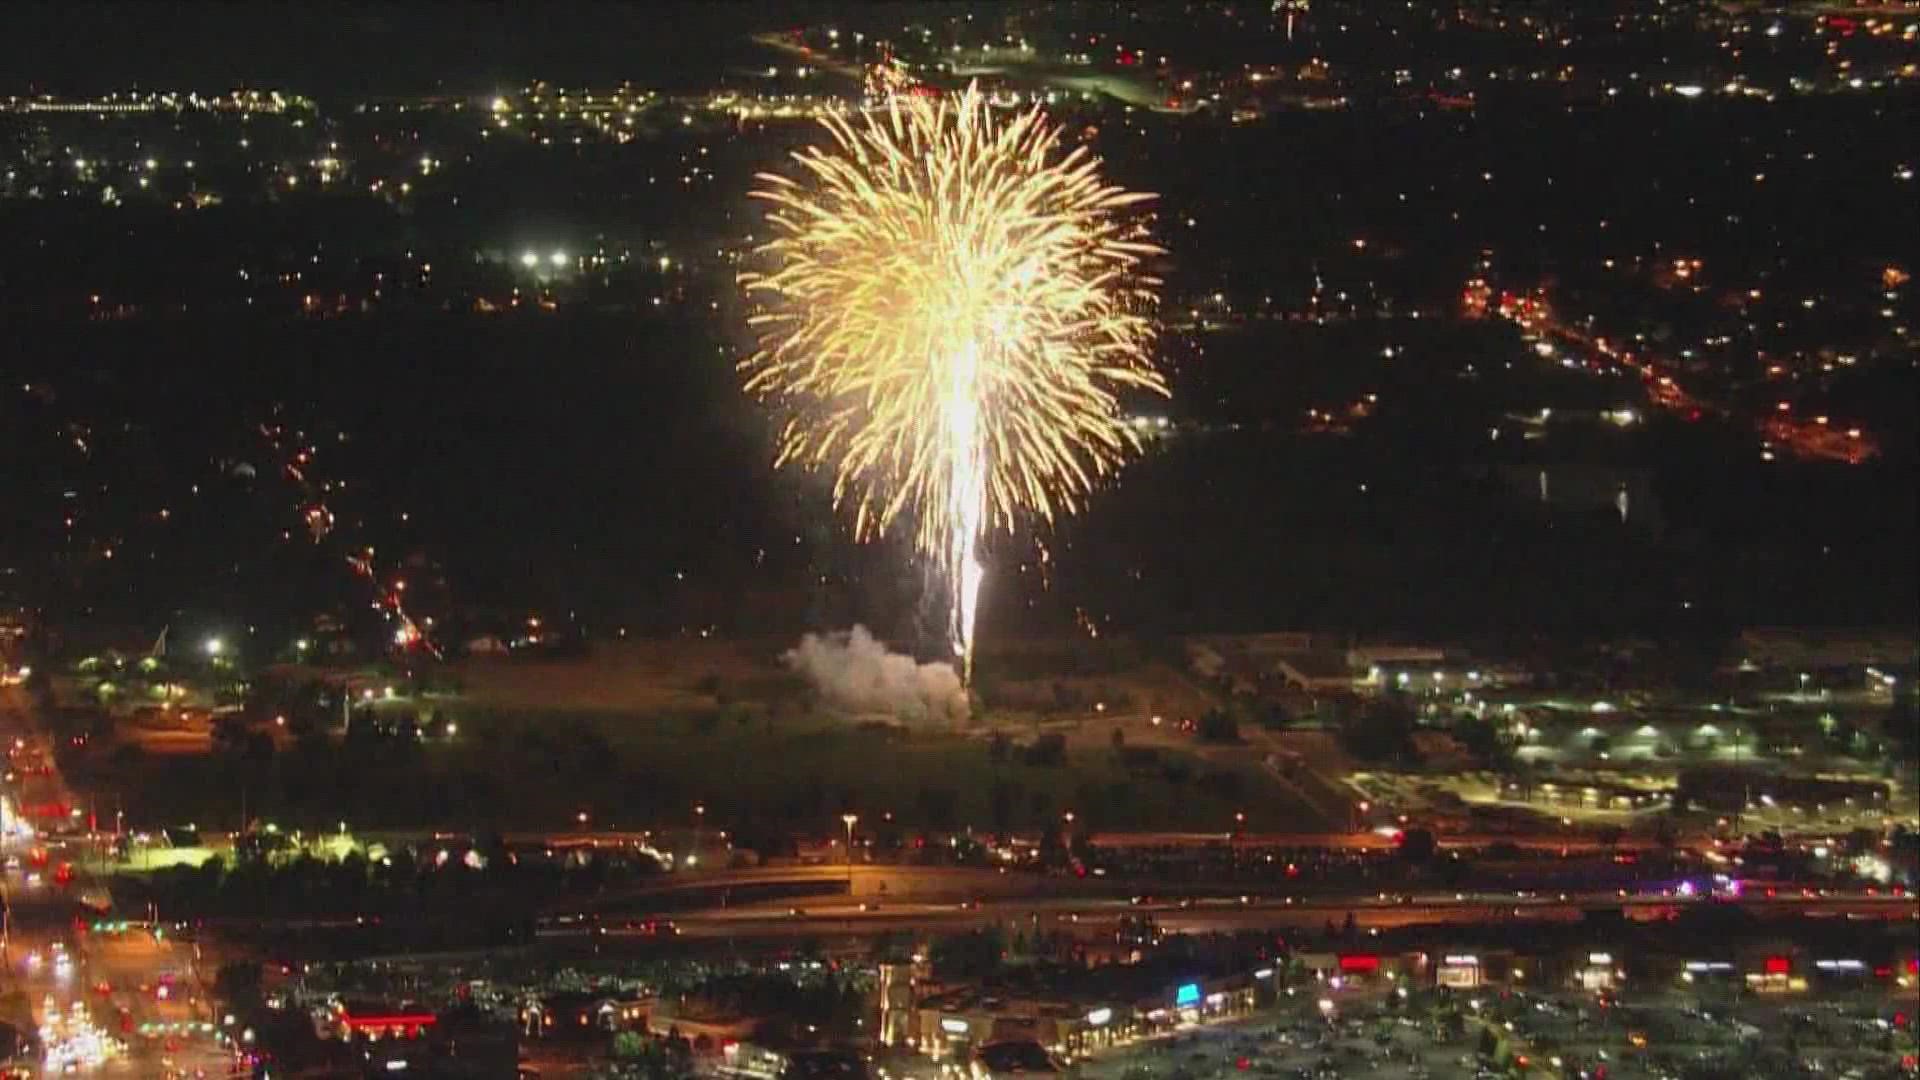 Check out a couple of the fireworks displays (and some illegal shows we spotted) that lit up the skies of Aurora and Louisville on Monday night.